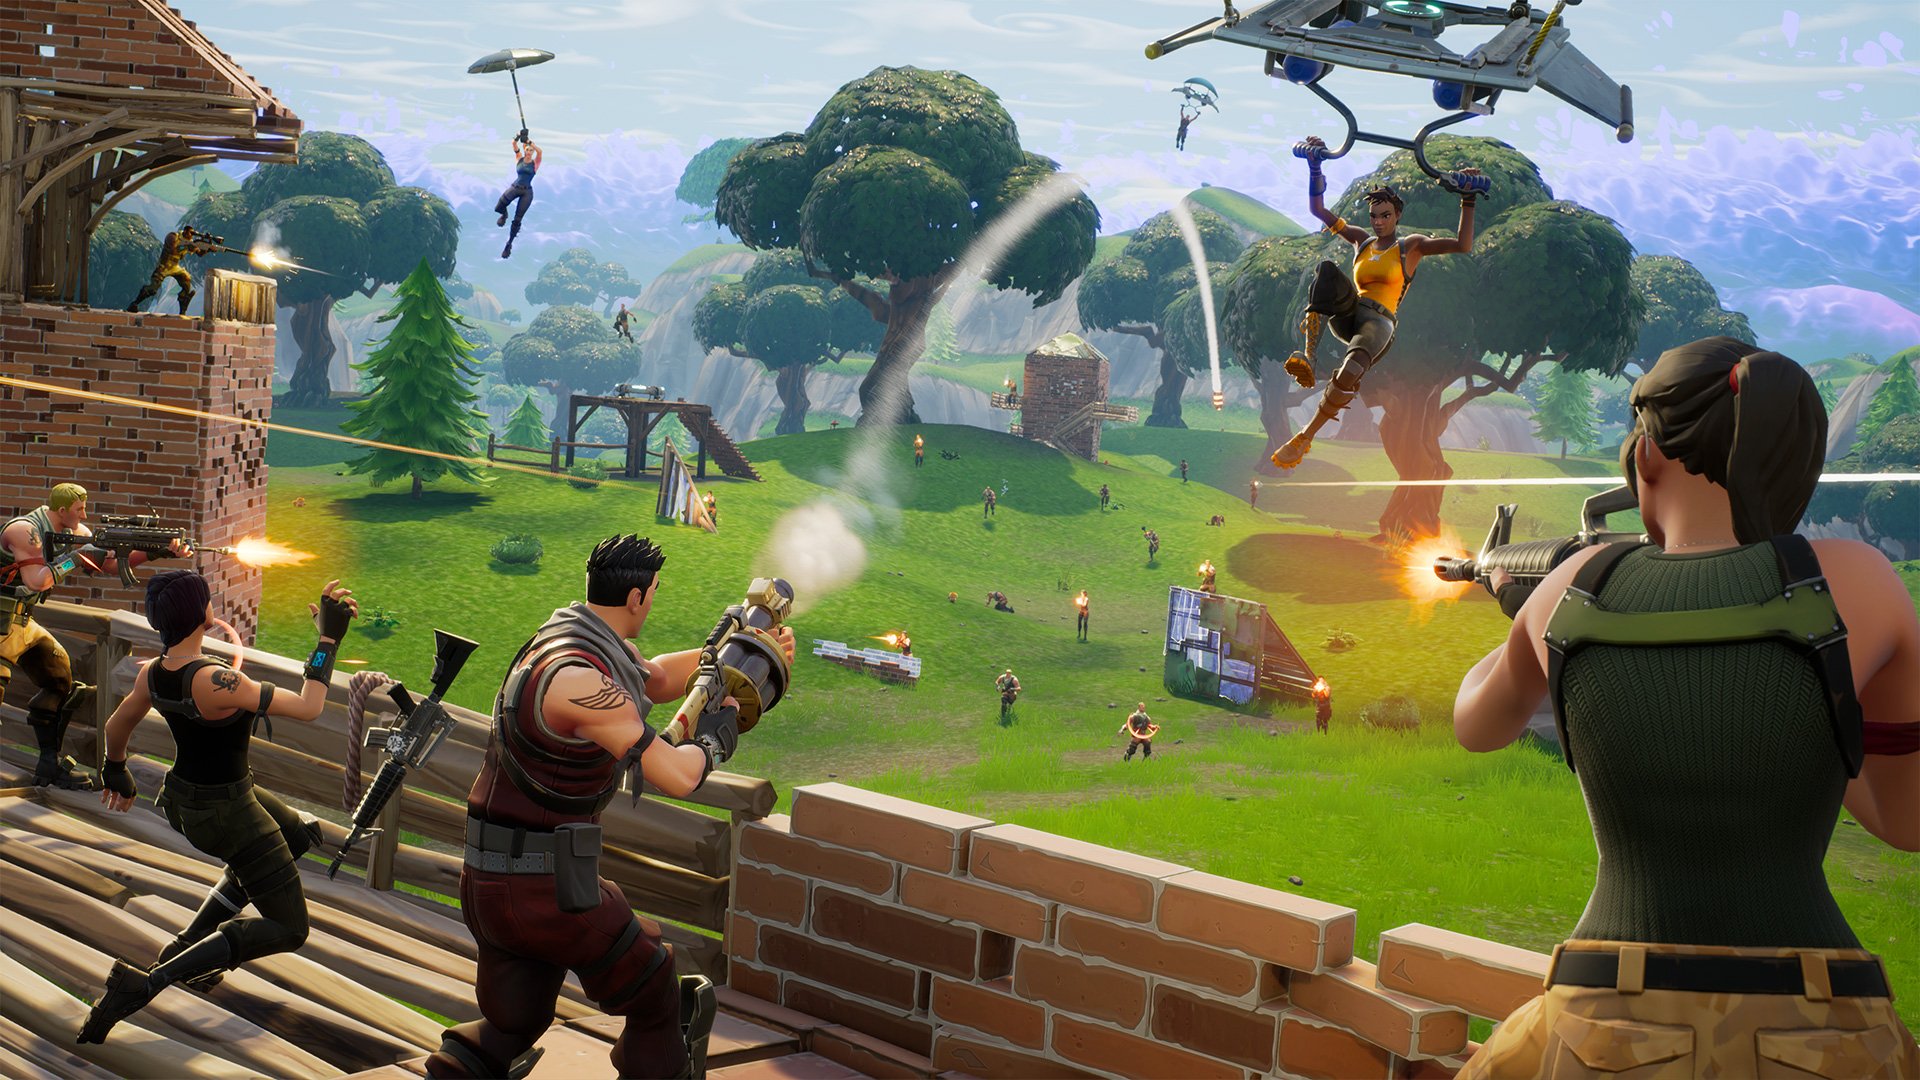 Did Epic respond to the breach in an appropriate time frame?